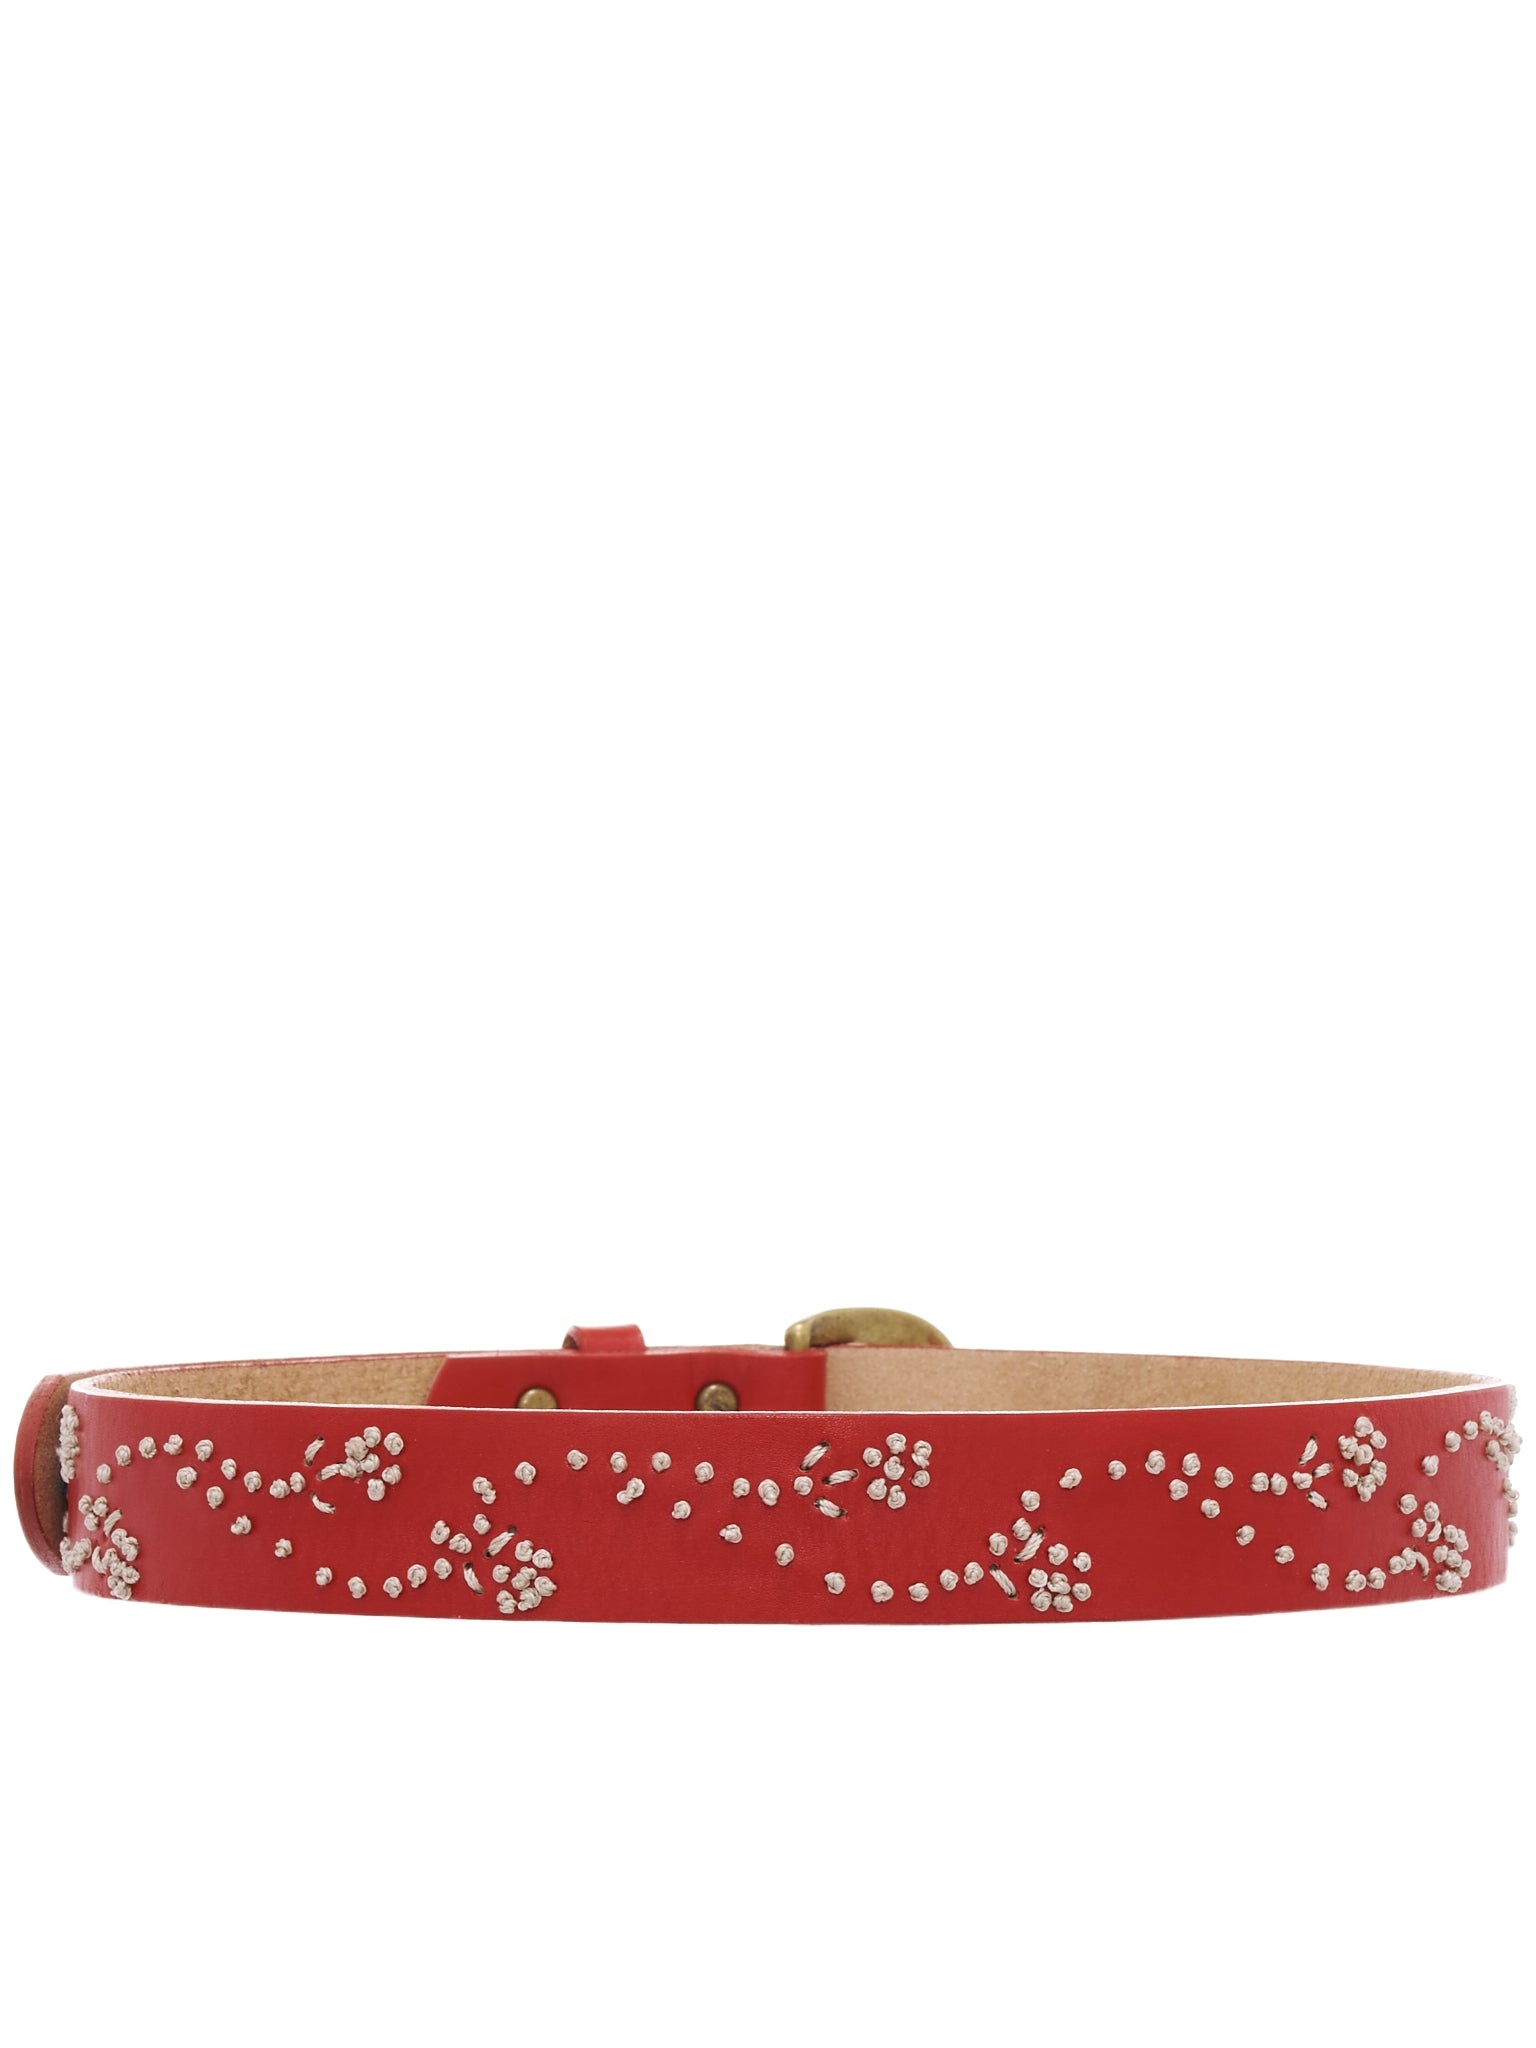 Floral Embroidery Belt - 2